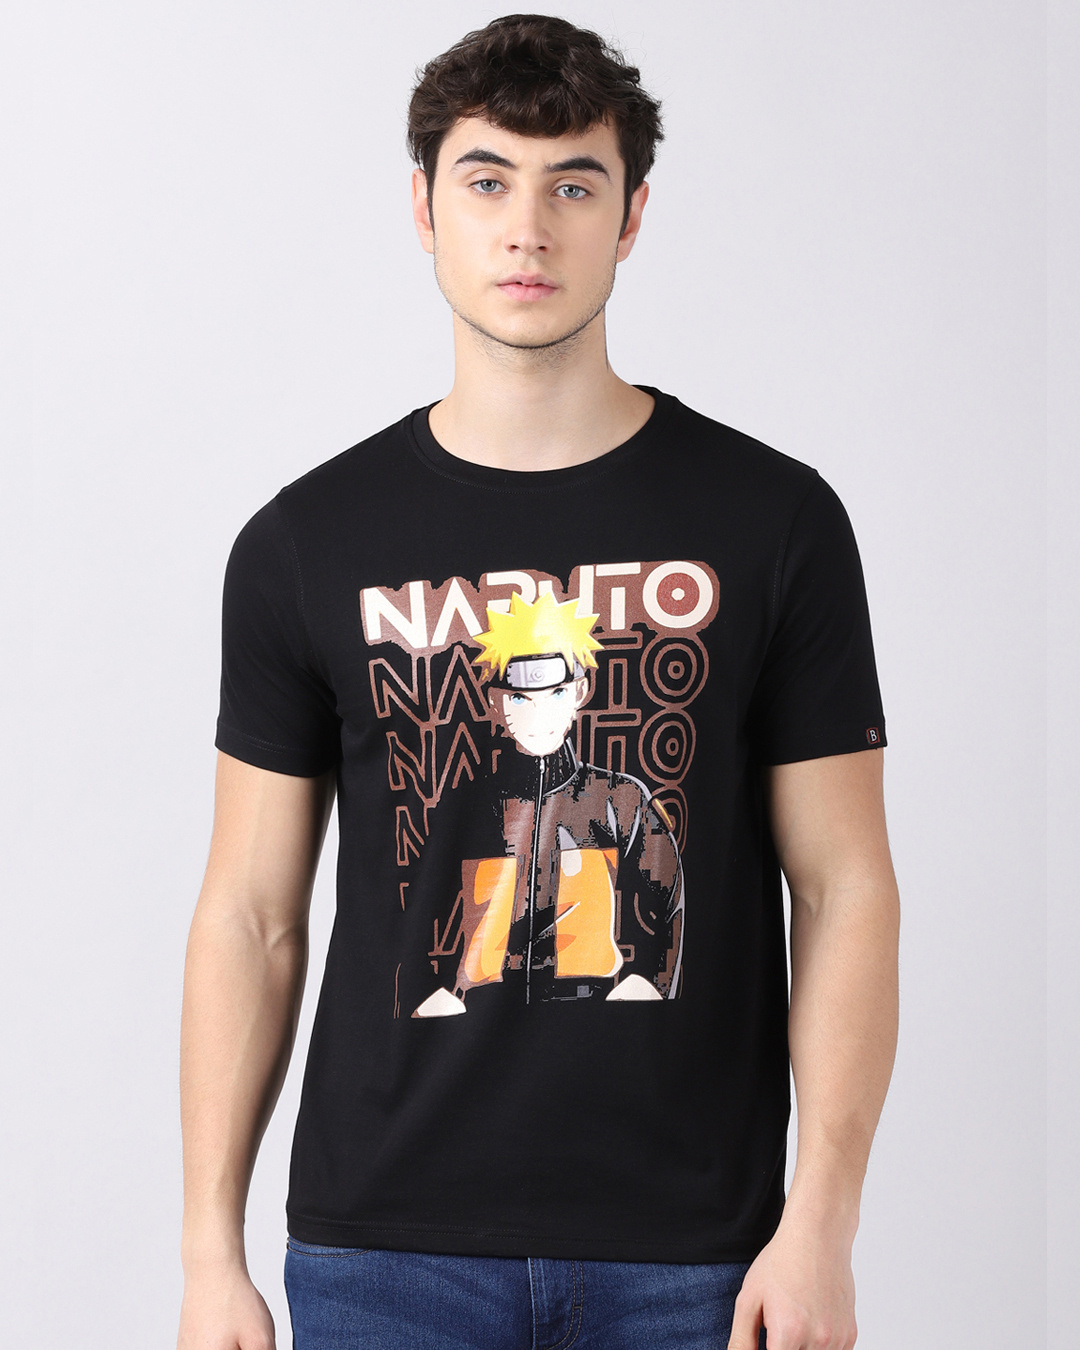 Naruto Anime Printed T-Shirt For Men And Women